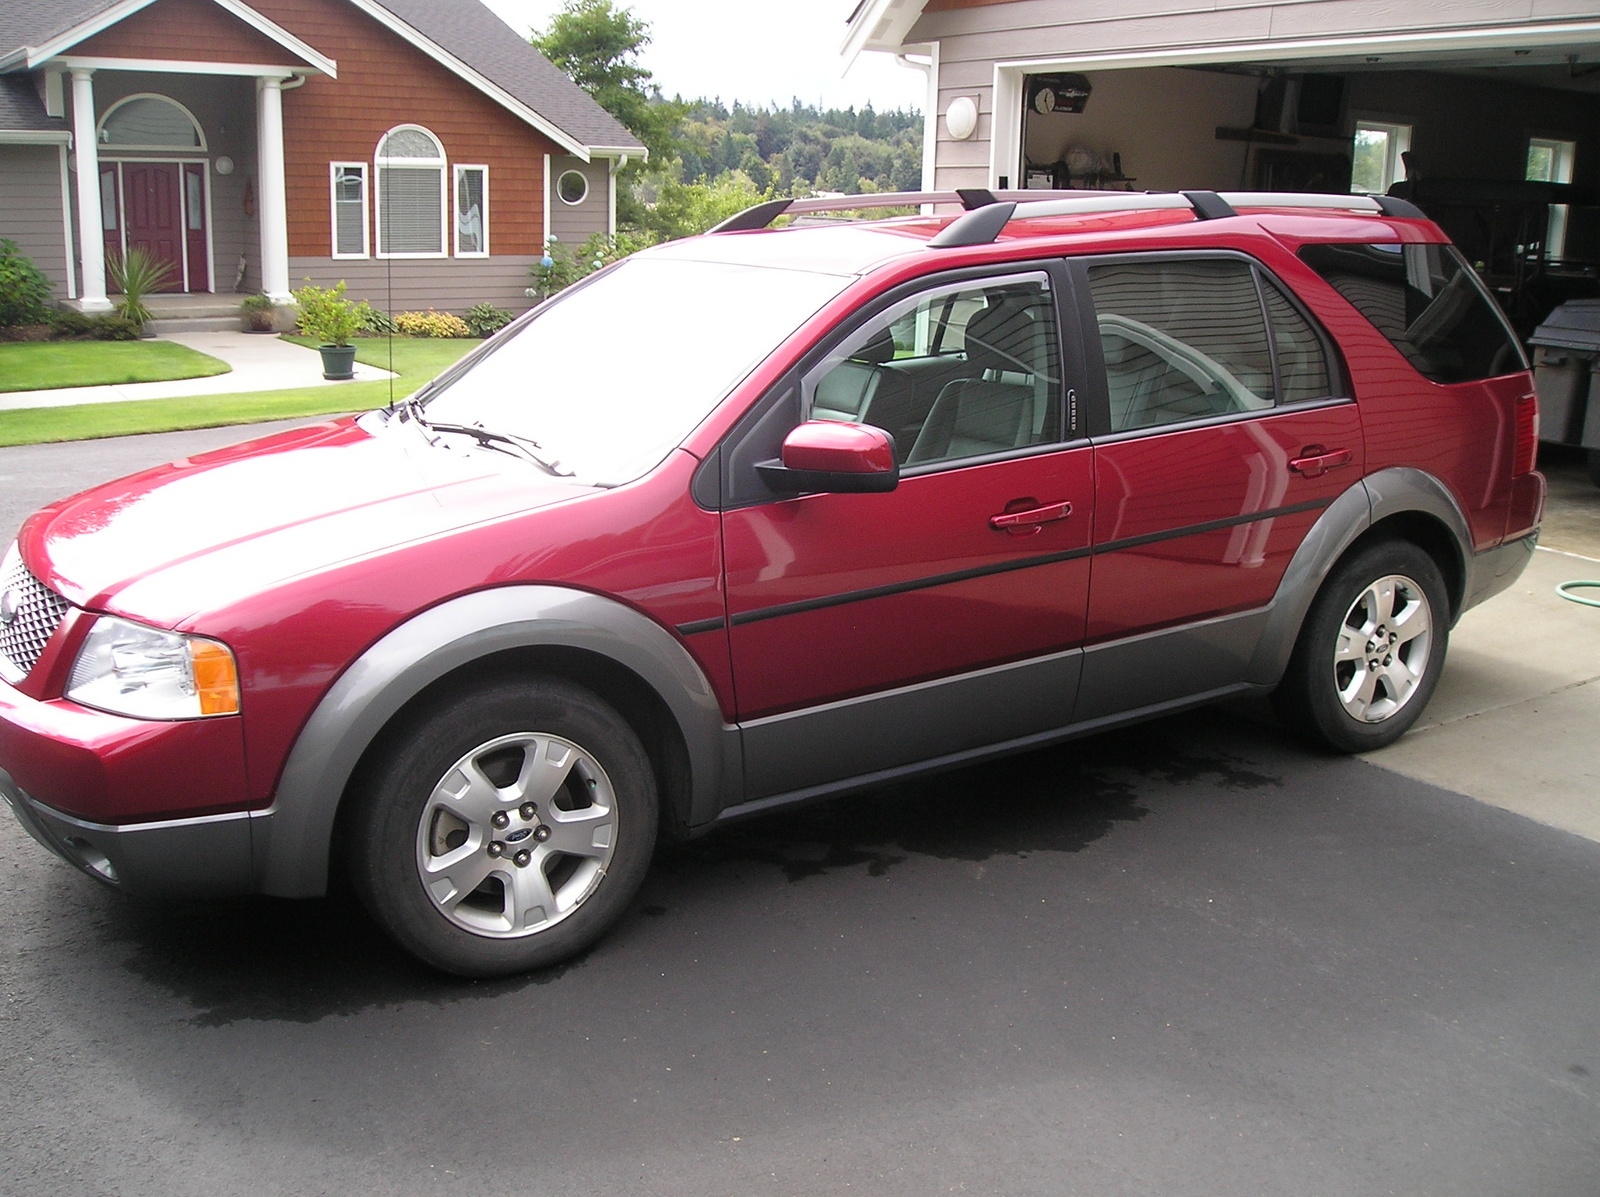 2006 Ford freestyle good car #1